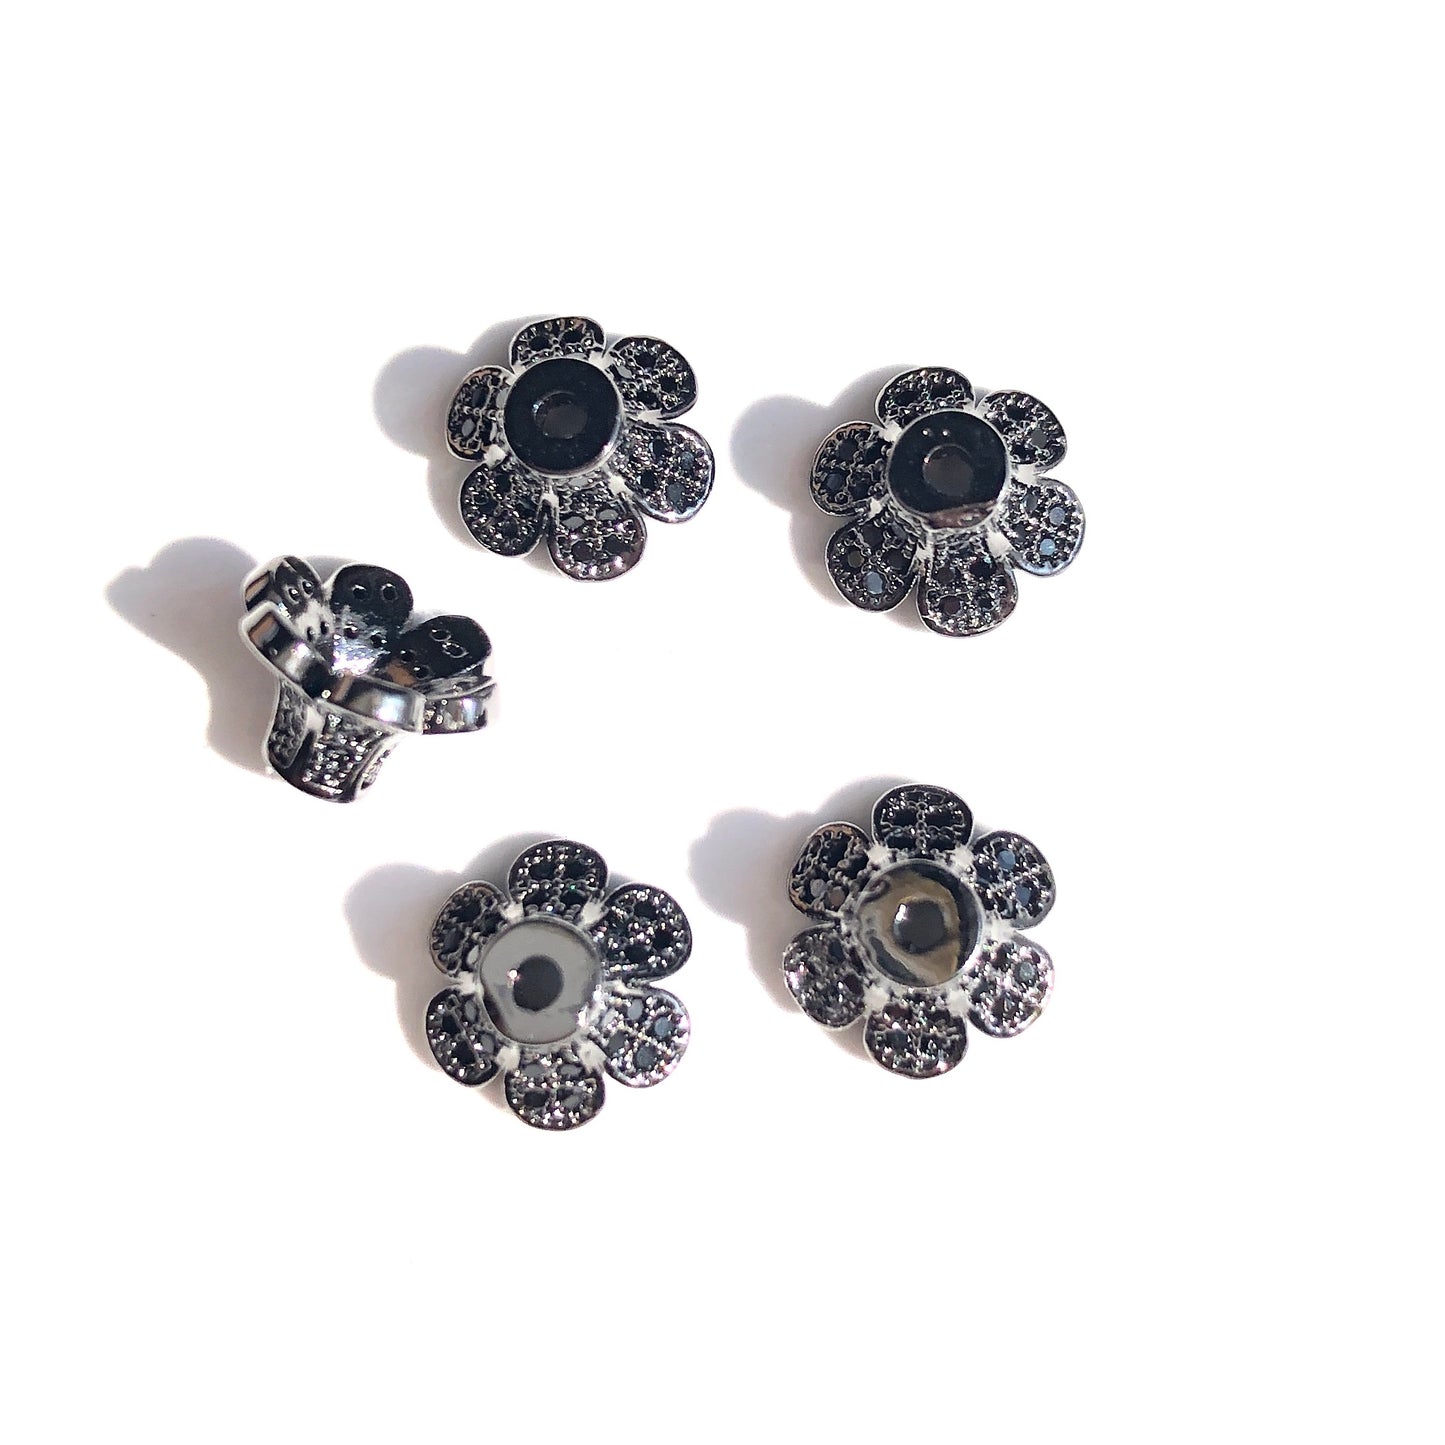 20pcs/lot 10*6mm CZ Paved Beads Caps Flower Spacers Black on Black CZ Paved Spacers Beads Caps New Spacers Arrivals Charms Beads Beyond